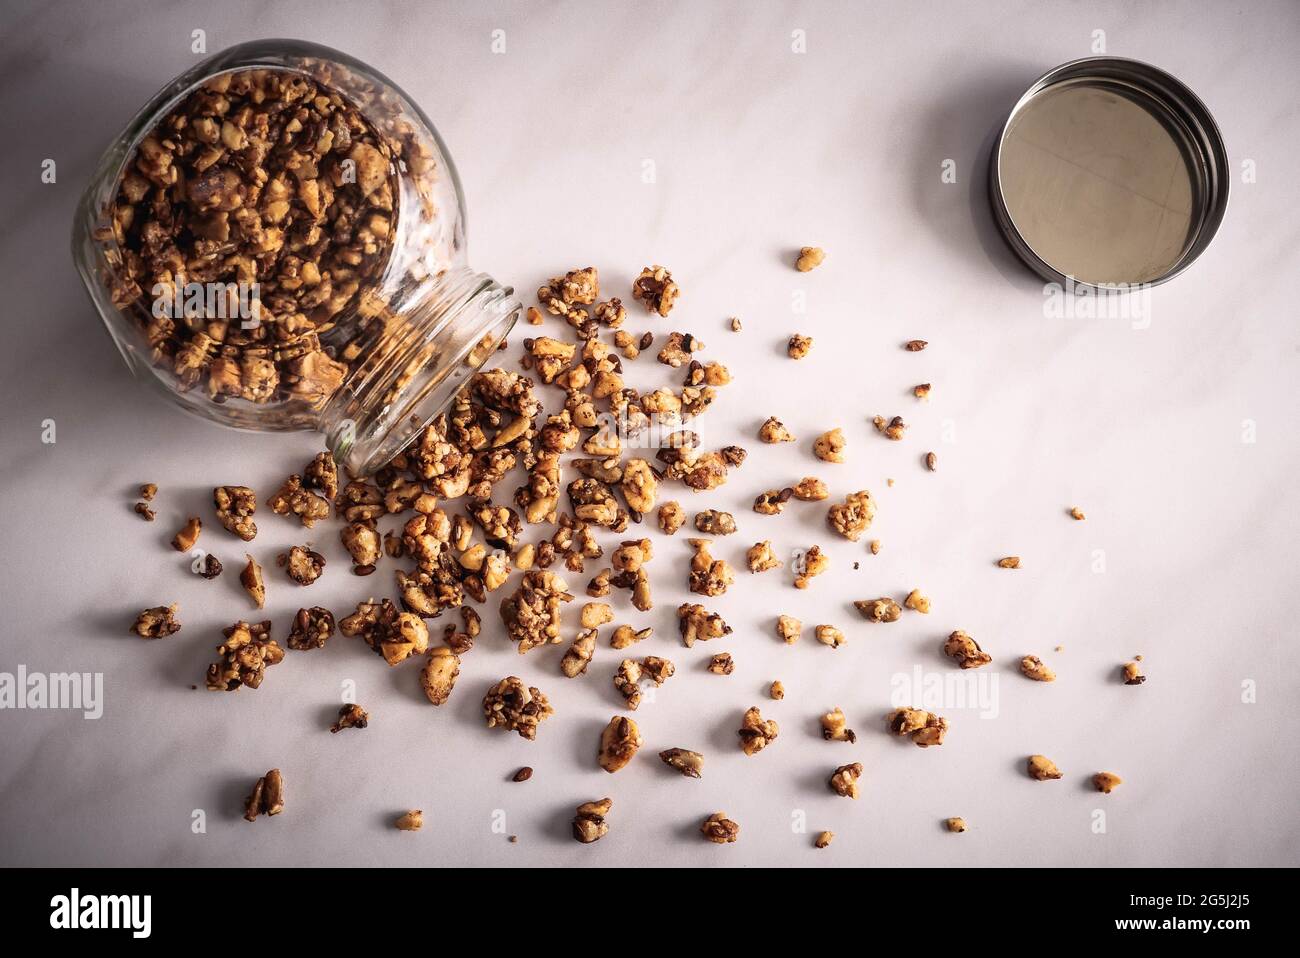 Top view of fresh homemade healthy granola in a glass jar on a breakfast white marble table. Stock Photo